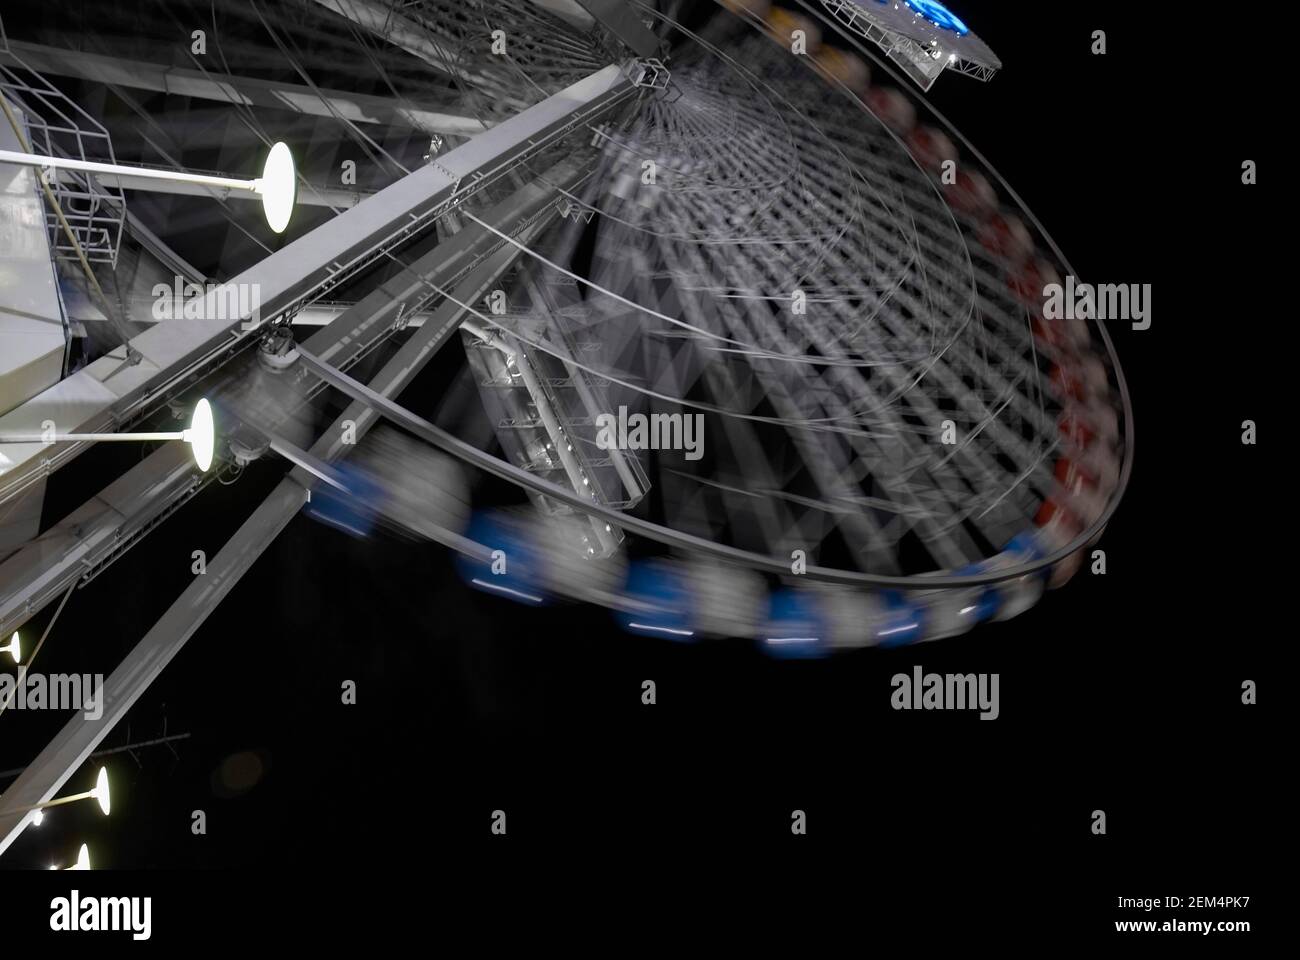 Low angle view of a Ferris wheel Stock Photo